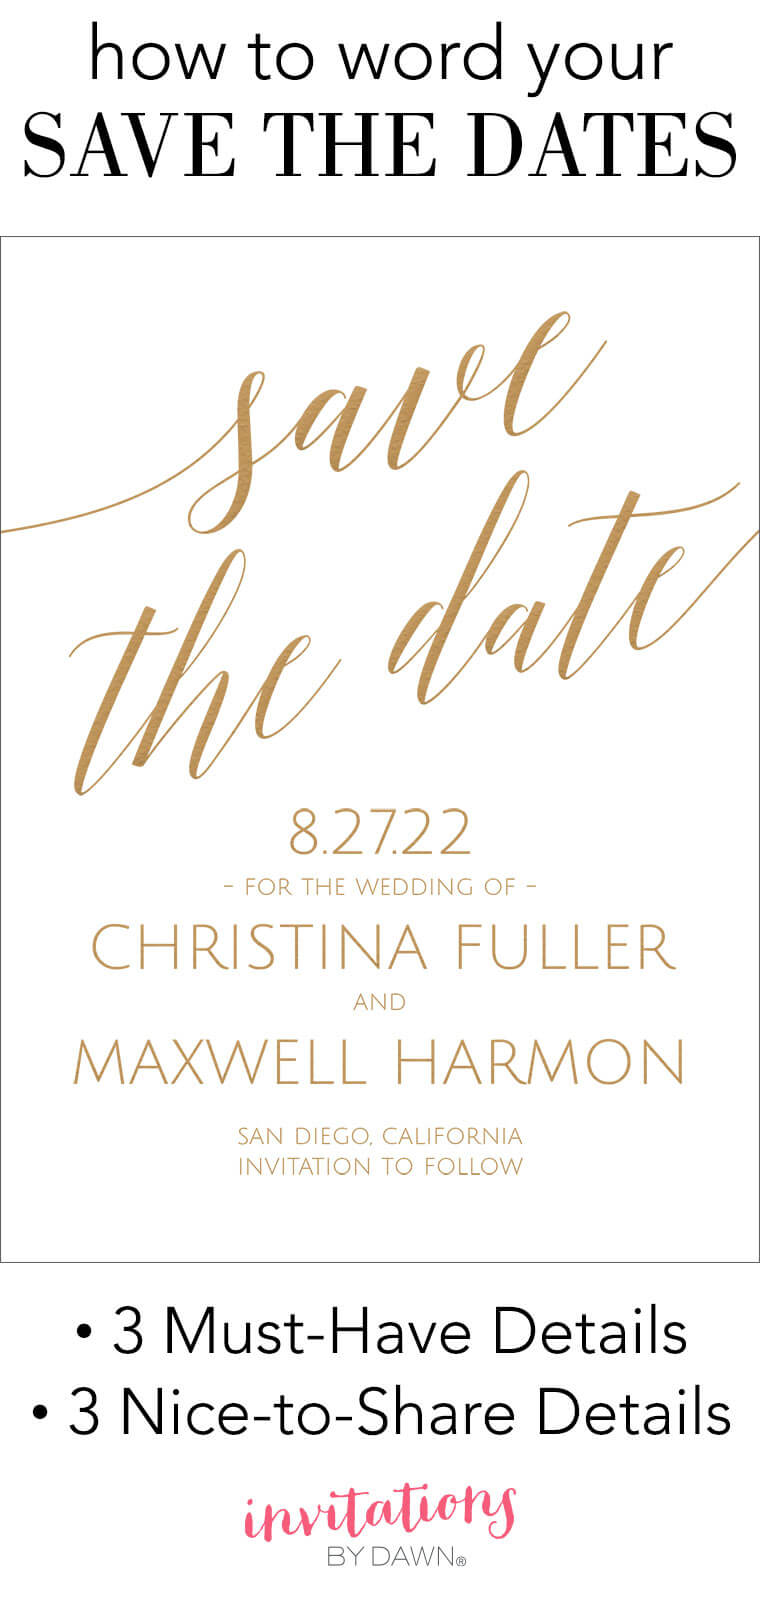 Save The Date Wording | Invitationsdawn Throughout Save The Date Templates Word